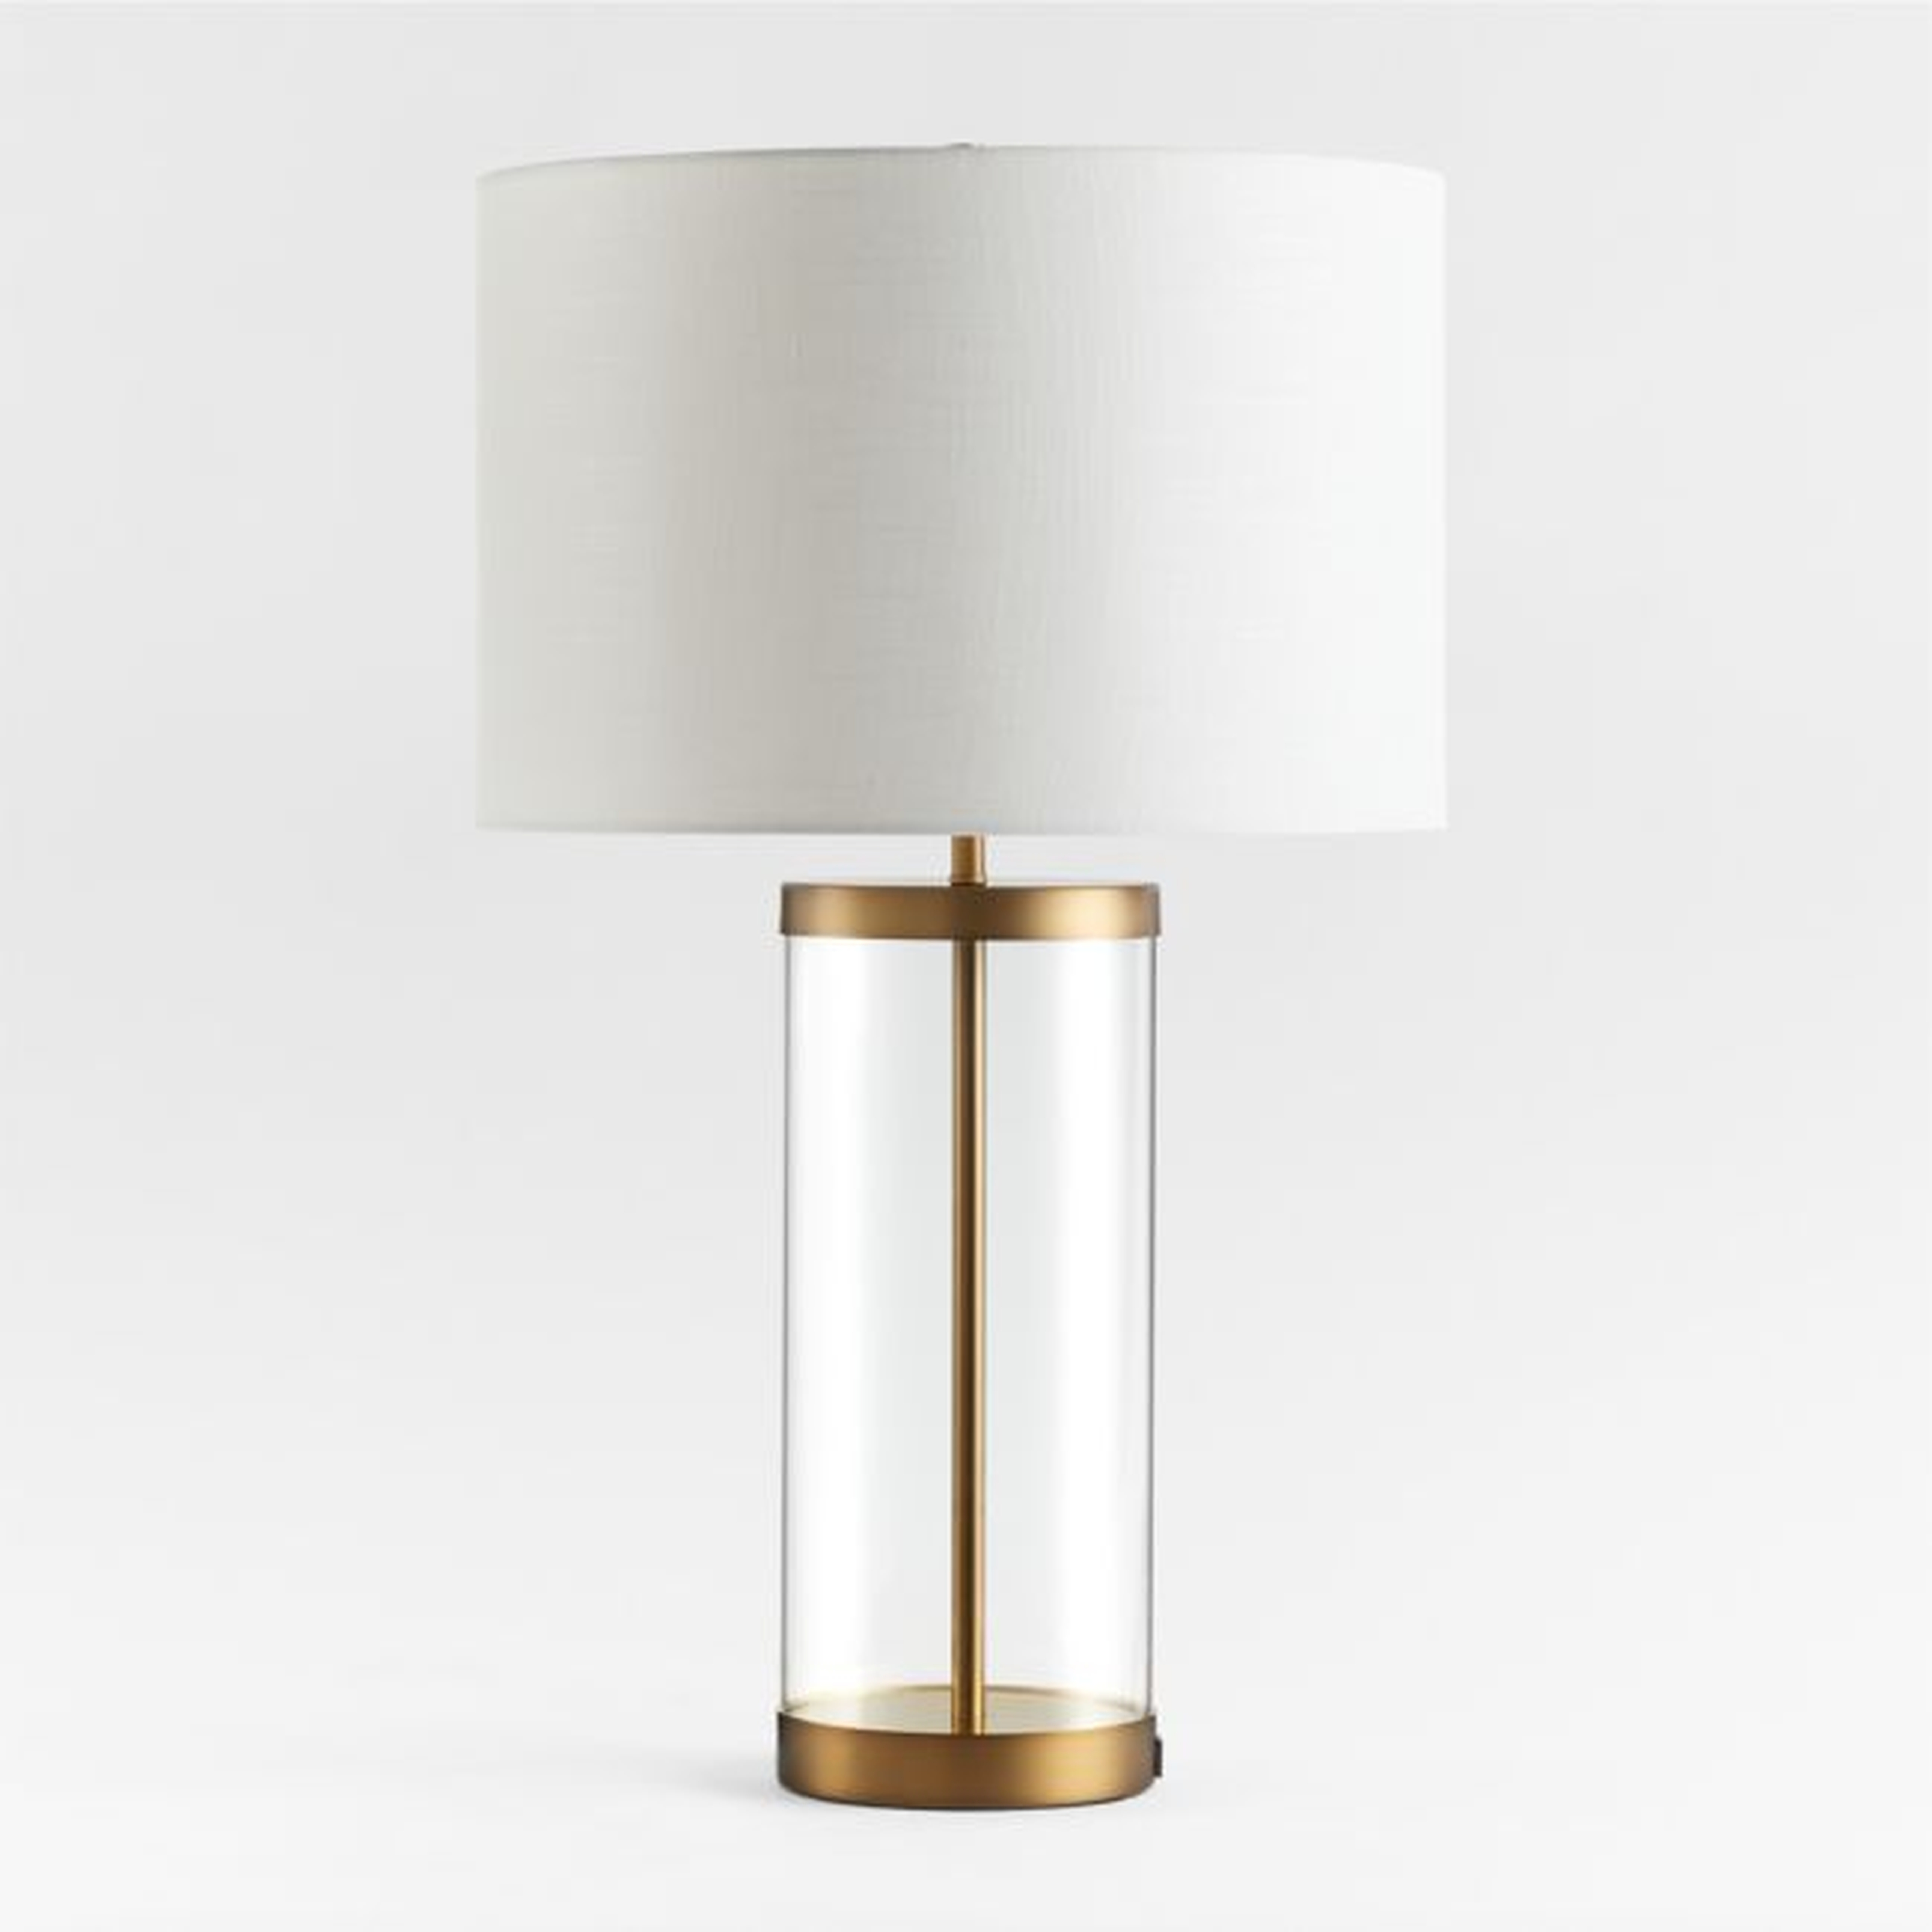 Promenade Brass and Glass Table Lamp with USB Port - Crate and Barrel